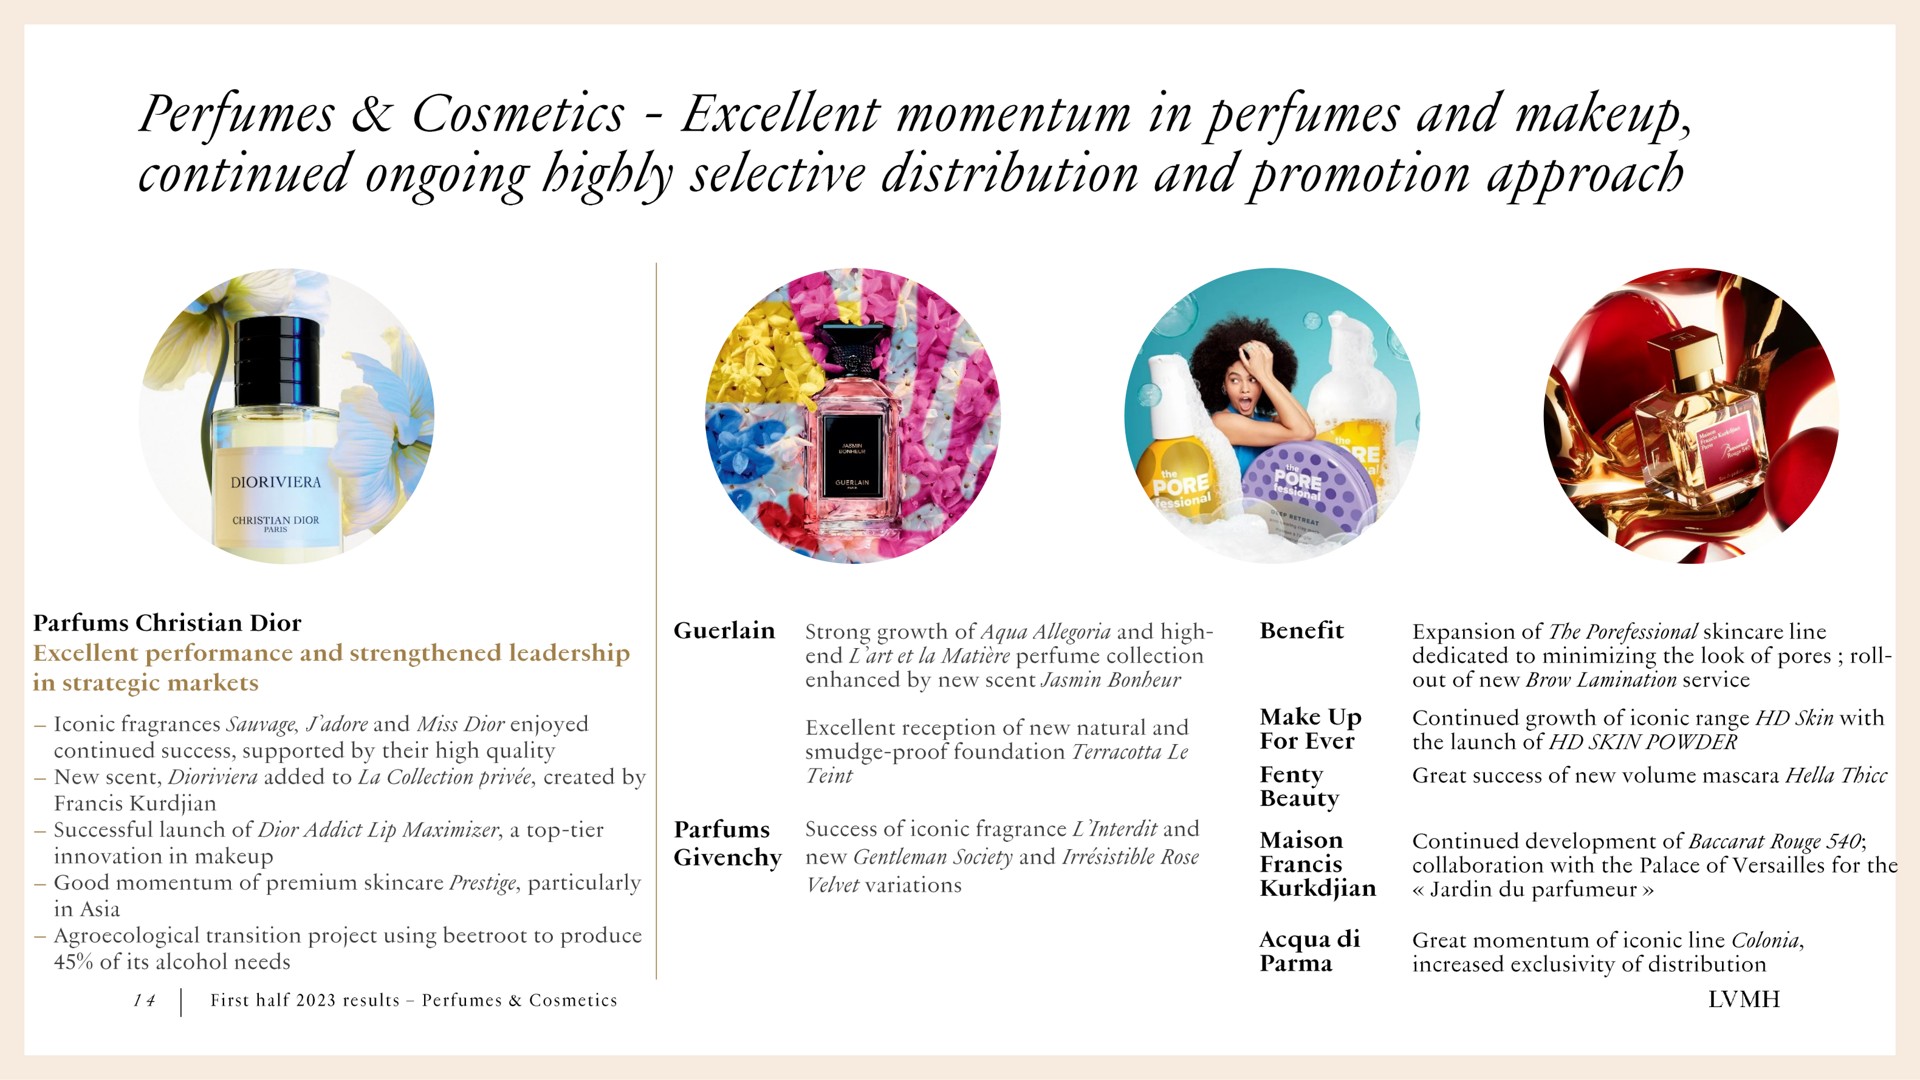 perfumes cosmetics excellent momentum in perfumes and continued ongoing highly selective distribution and promotion approach | LVMH